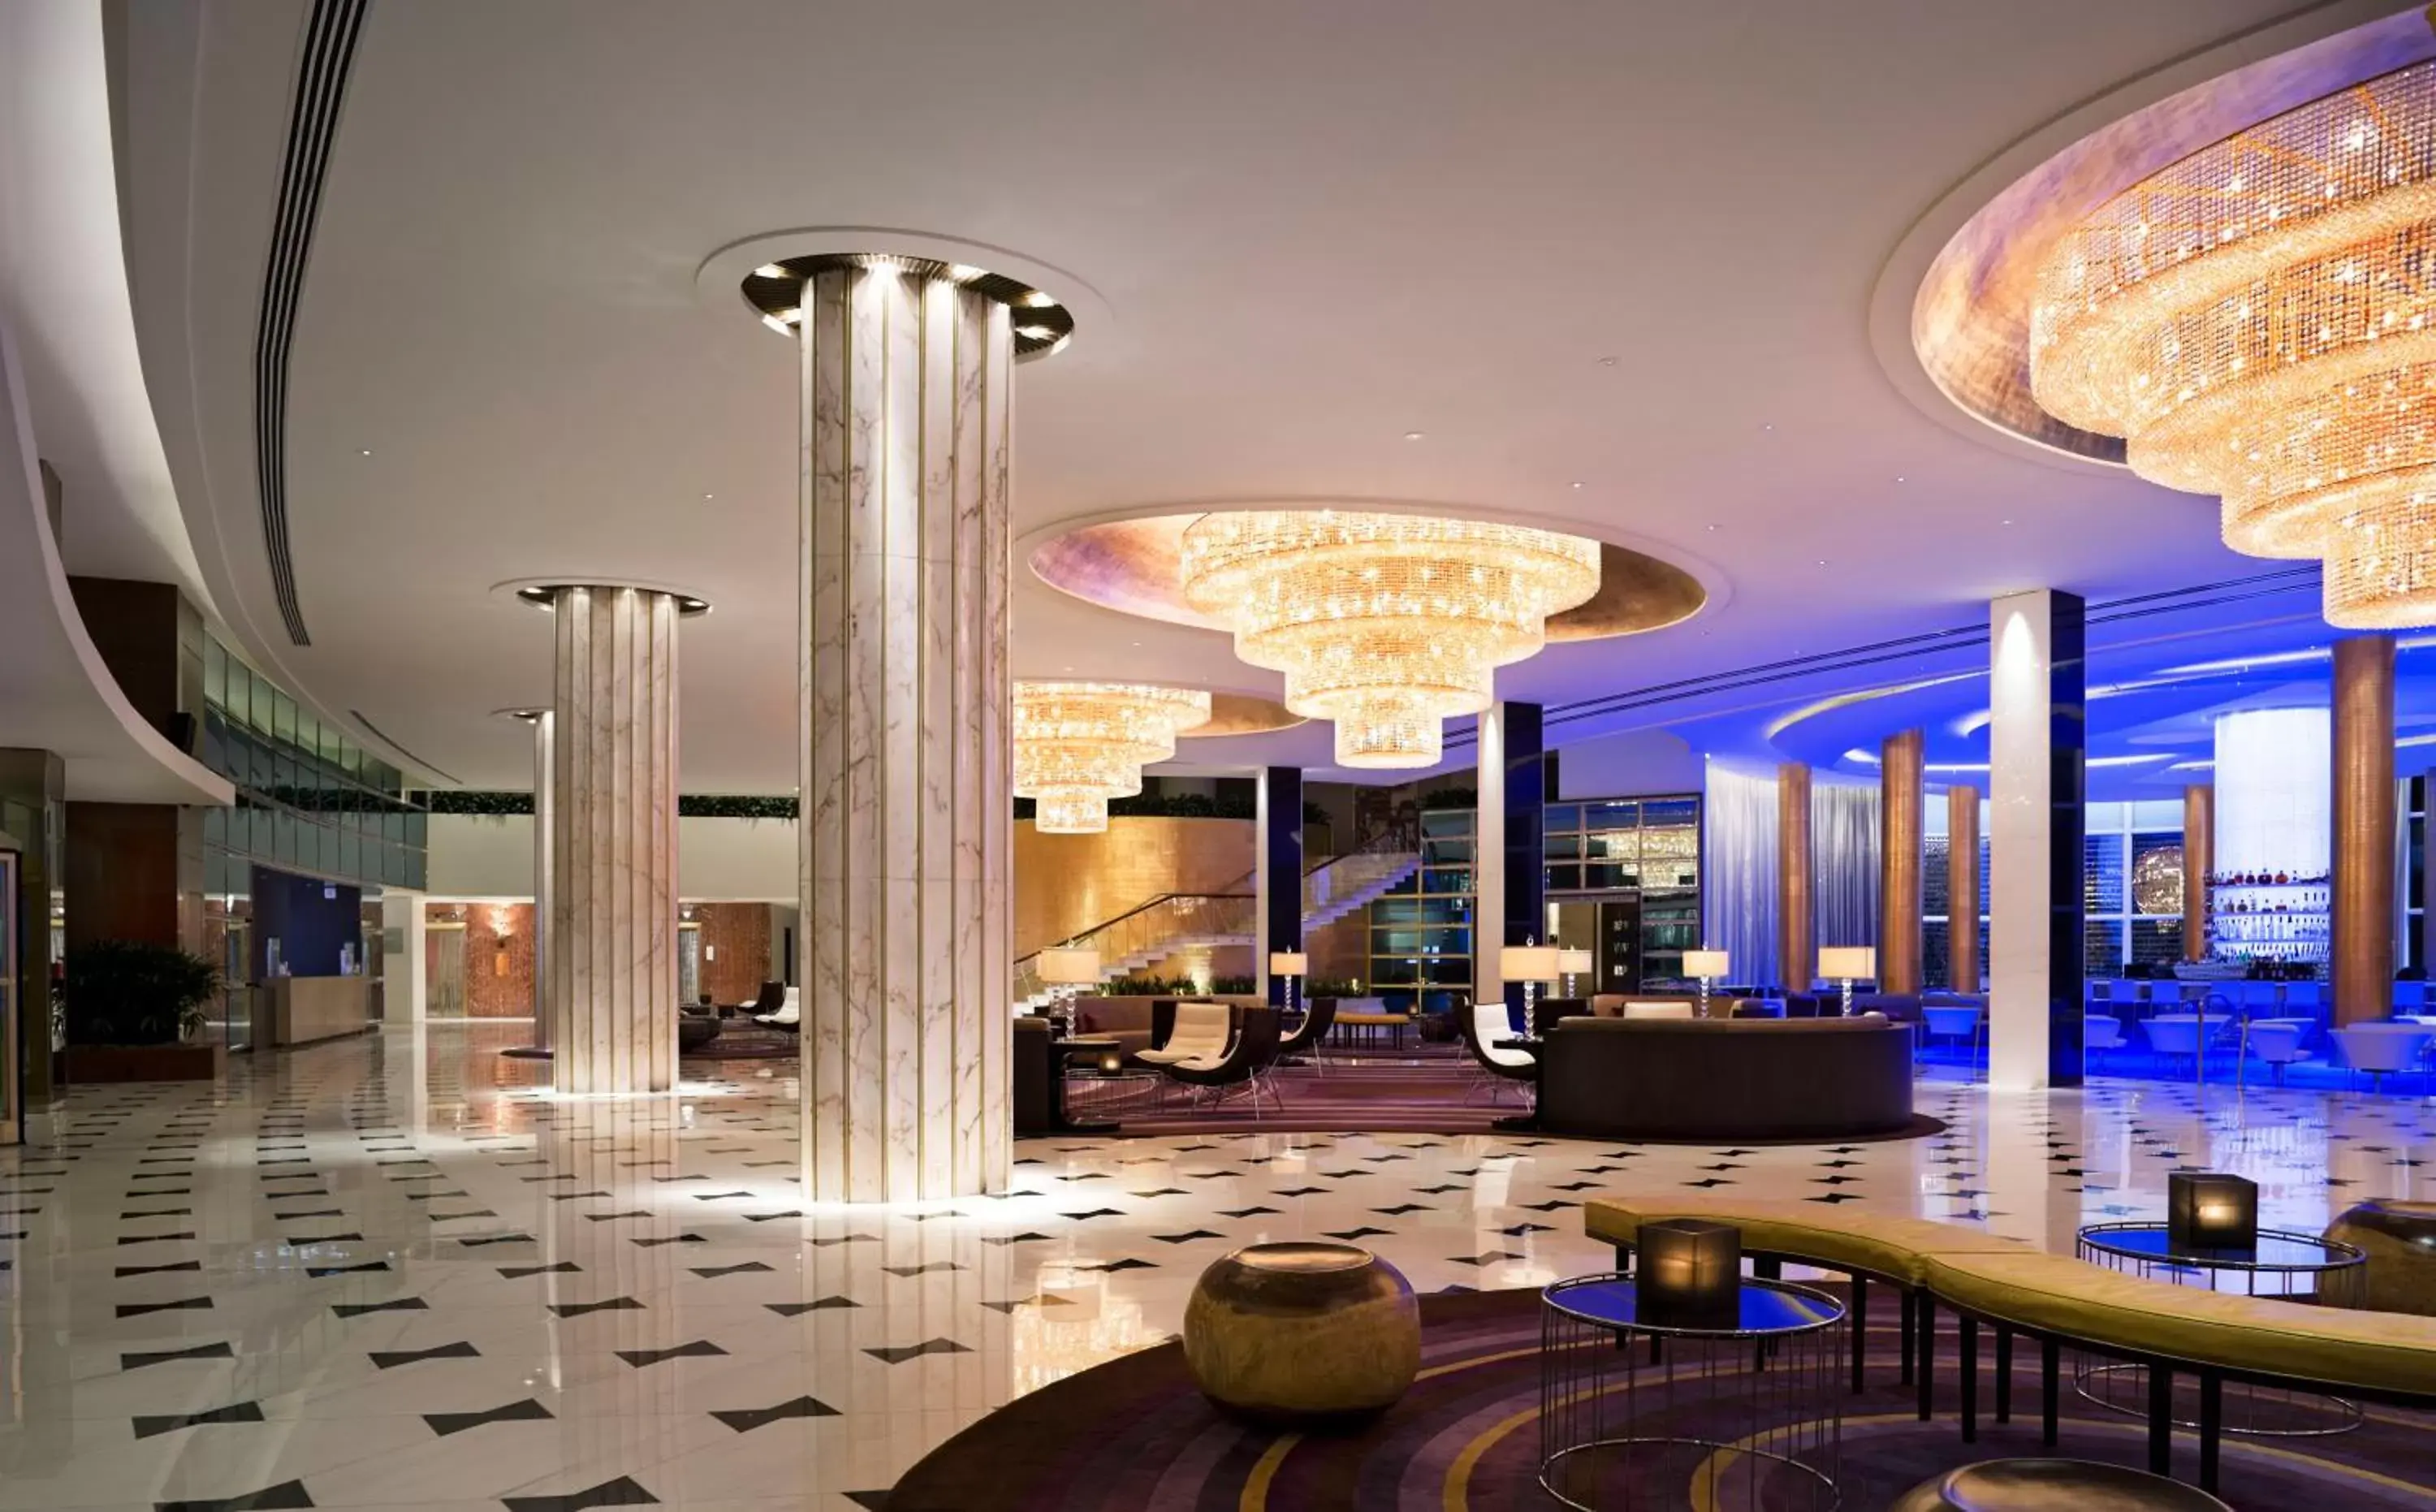 Lobby or reception in Fontainebleau Miami Beach